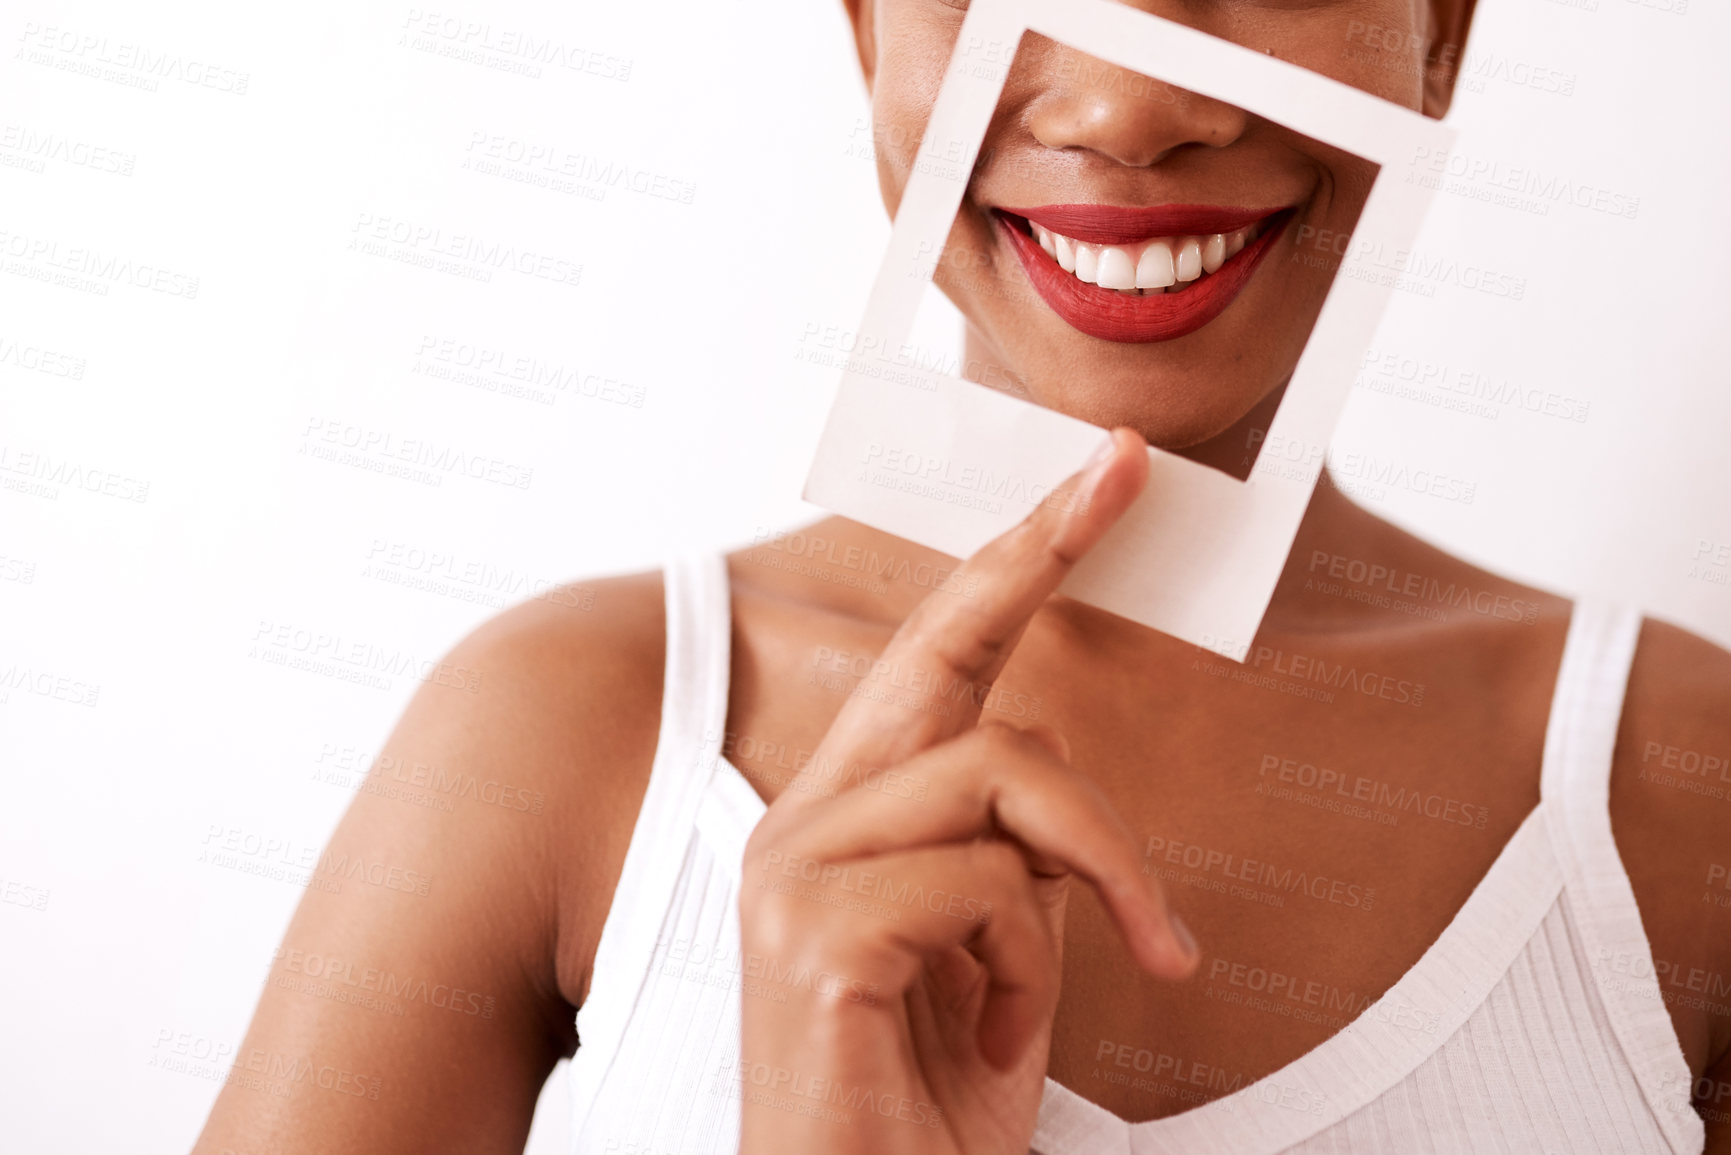 Buy stock photo Studio shot of an unrecognizable woman holding a frame over her red lips